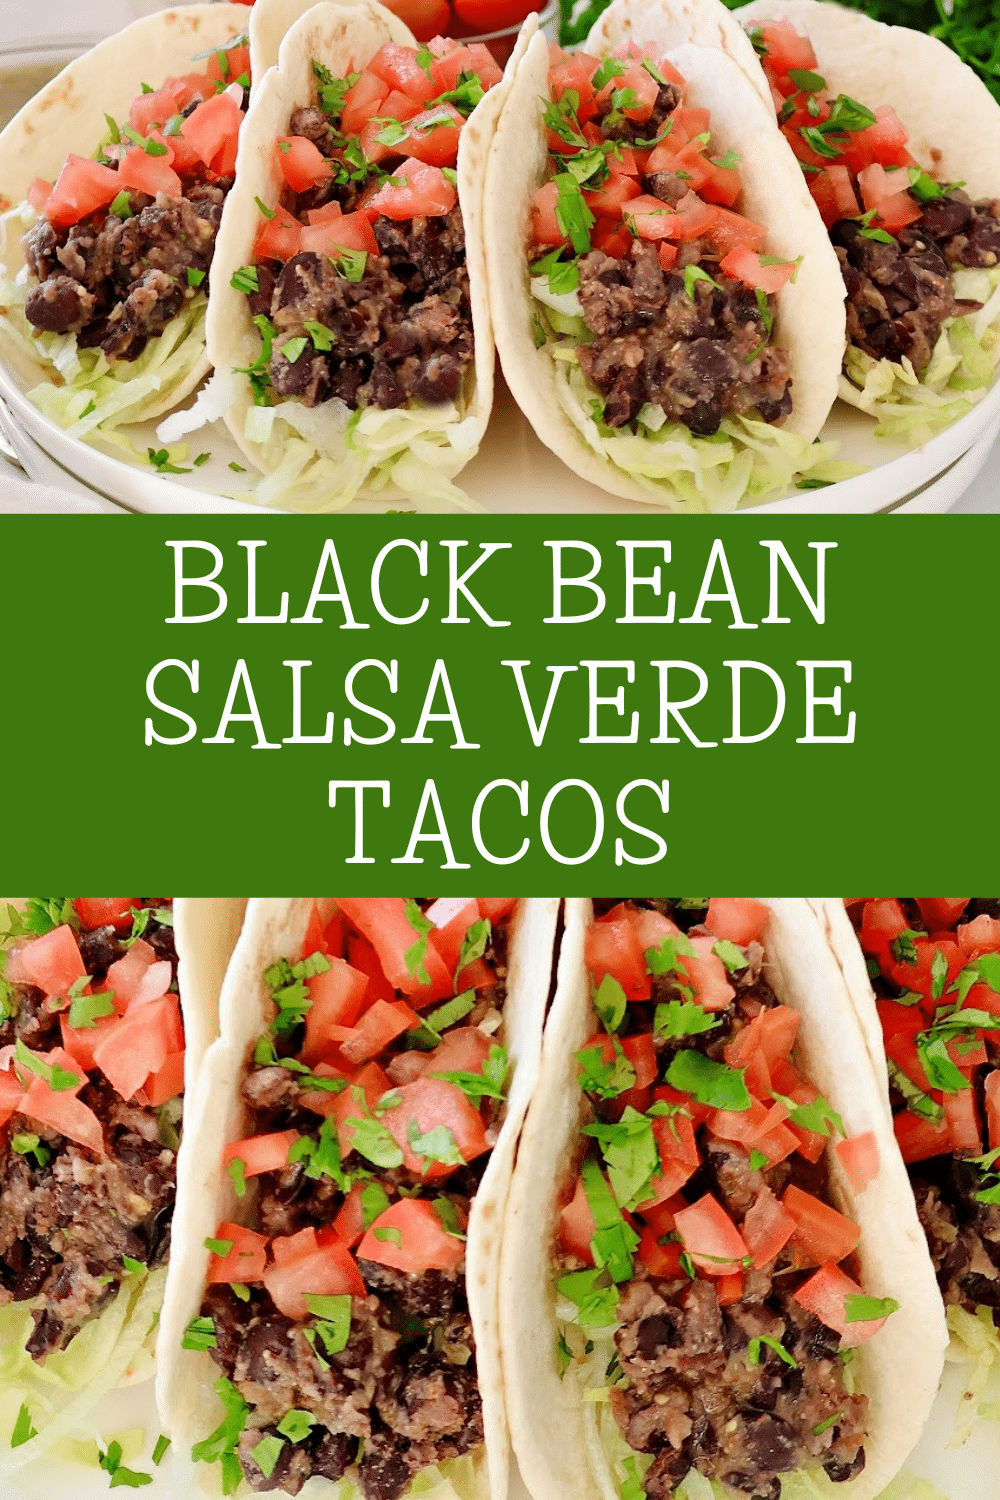 Black Bean Salsa Verde Tacos ~ Quick and easy tacos with hearty black beans, savory seasonings, and smoky green salsa. via @thiswifecooks